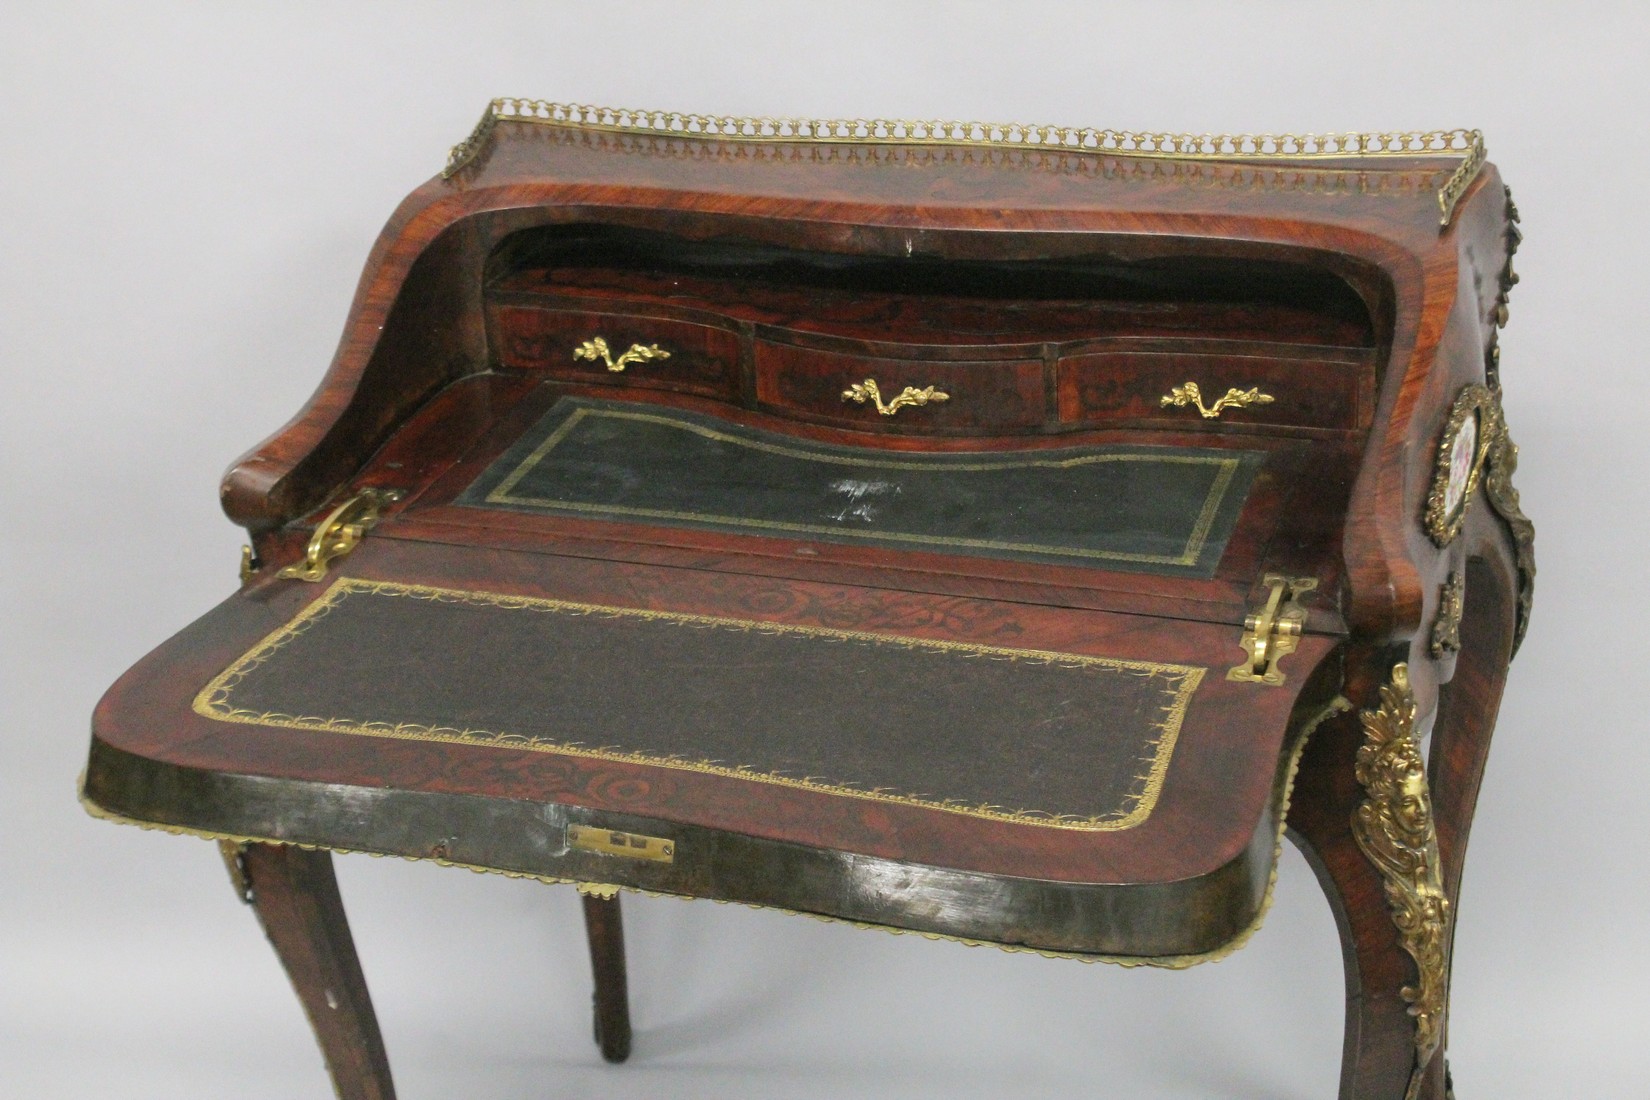 A SUPERB 19TH CENTURY LOUIS XVI STYLE KINGWOOD BUREAU with brass grill, ormolu mounts and inset with - Image 6 of 12